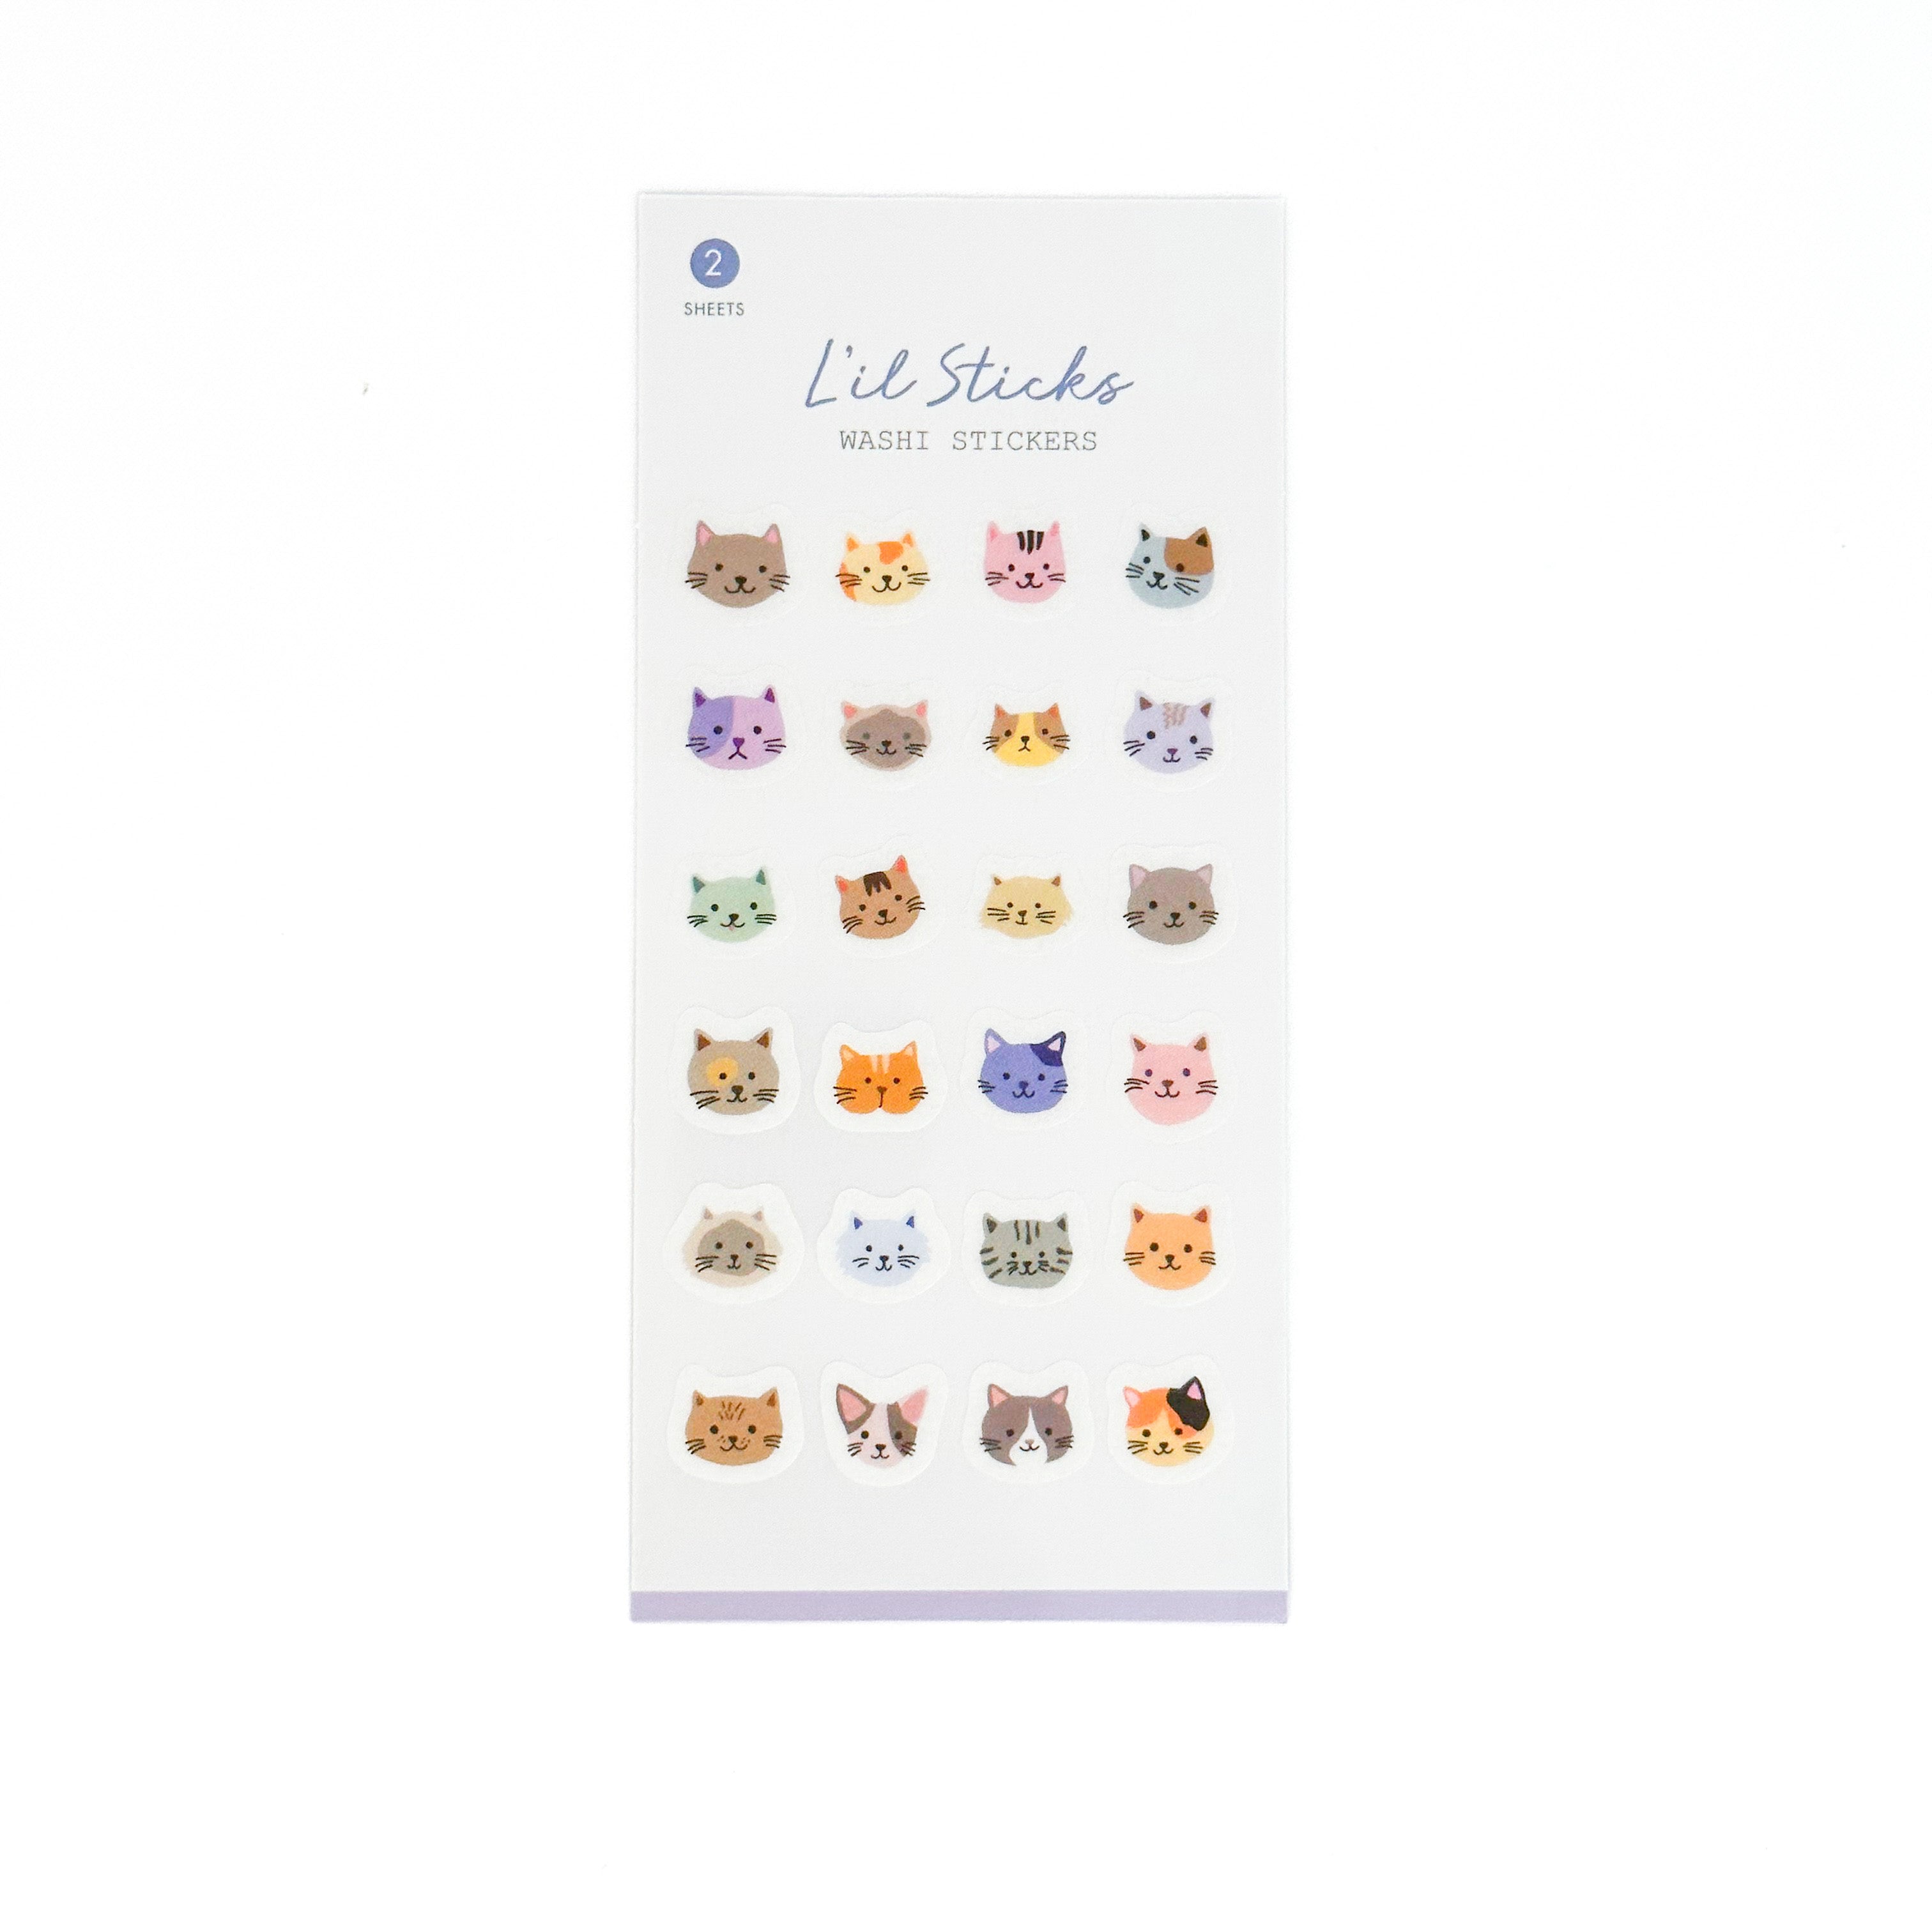 These cat stickers are carefully crafted with intricate details, offering a charming assortment of designs that are ideal for planning, marking important events, or adding decorative touches to your pages. These are from Girl of all Work and sold at BBB Supplies Craft Shop.